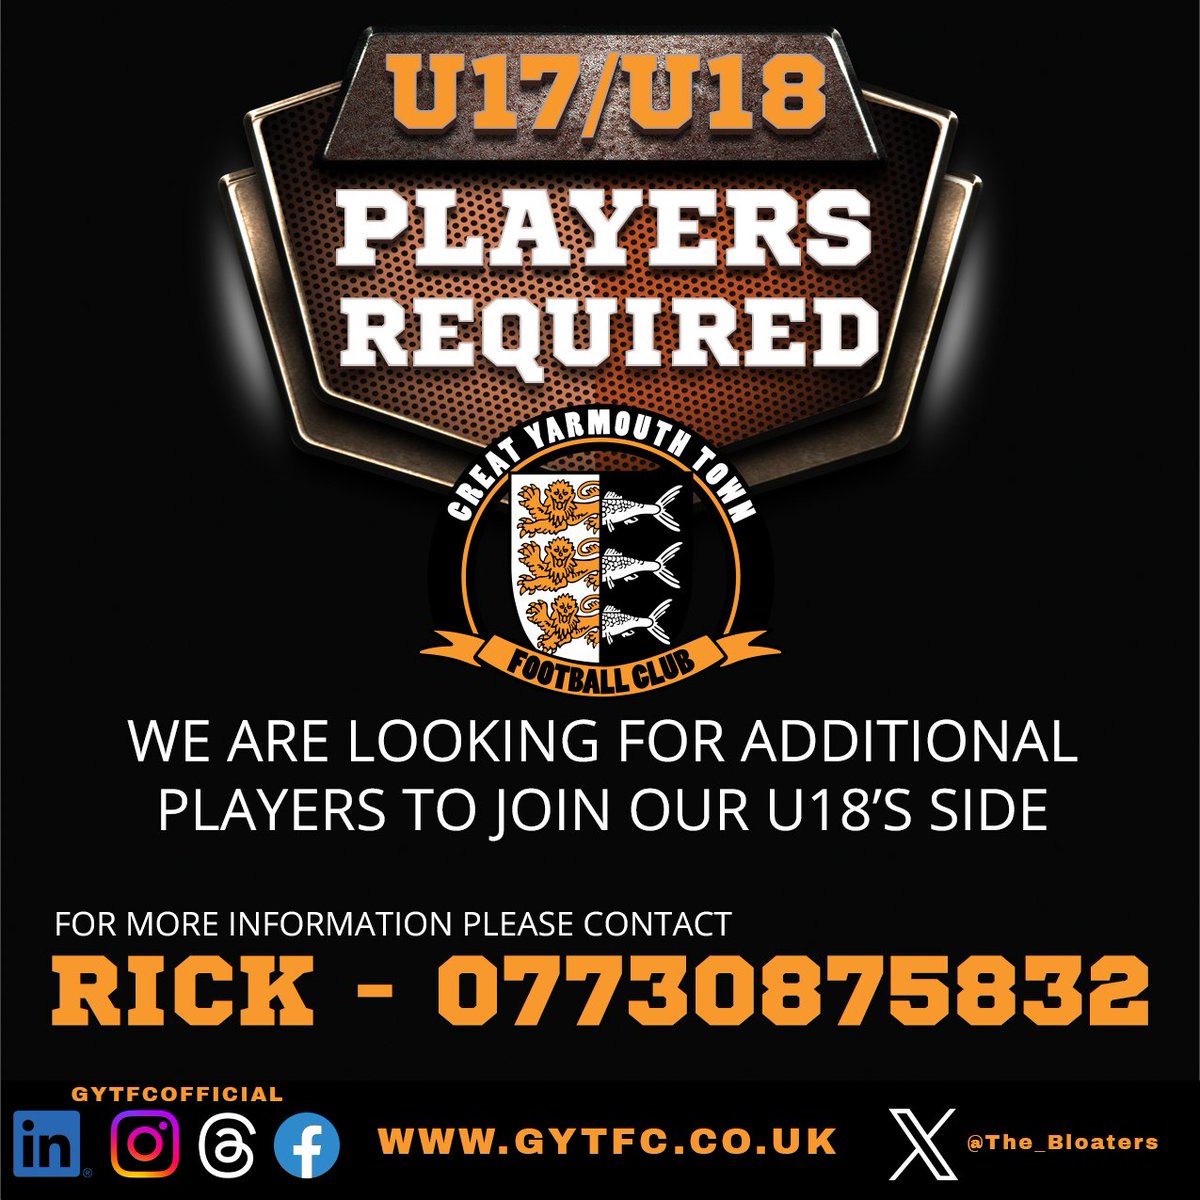 U17 & U18 Ballers Wanted! We're searching for talented footballers ready to dominate the pitch. We offer expert coaching to push you to be your best, Competitive matches to test your mettle, Supportive teammates & environment. Ready to take the next step? Give Rick a call